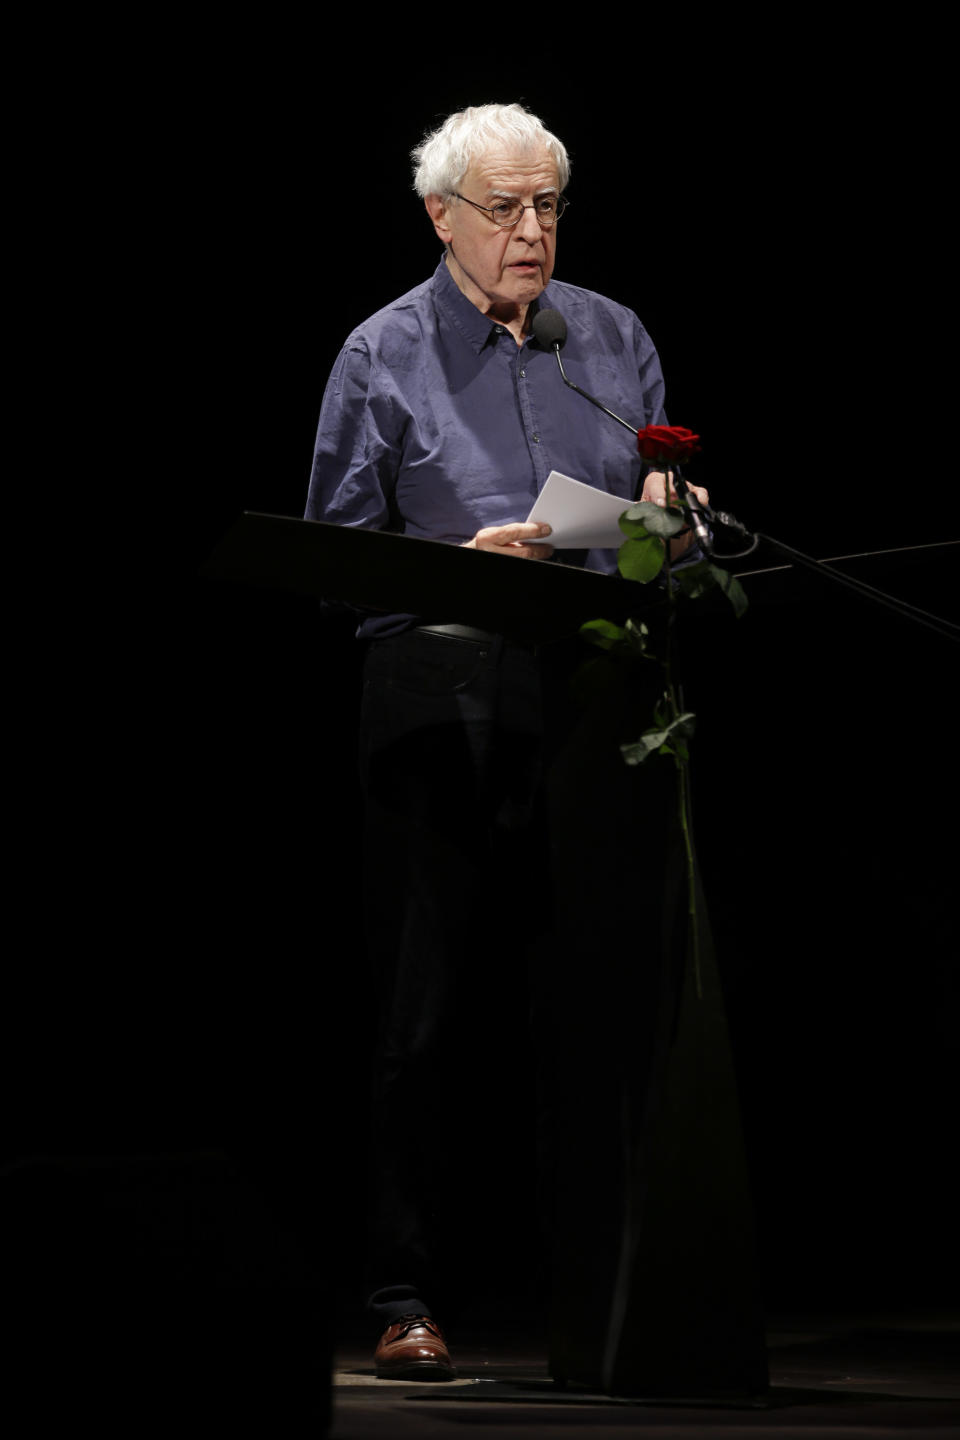 FILE - Serbian born writer Charles Simic, 1990 Pulitzer winner, attends "La Milanesiana" cultural event, in Milan, Italy, Thursday, June 29, 2017. Simic, the Pulitzer Prize-winning poet who awed critics and readers with his singular blend of lyricism and economy, tragic insight and disruptive humor, has died at age 84. Dan Halpern, executive editor at publisher Alfred A. Knopf, confirmed Simic's death Monday, Jan. 9, 2023, but did not immediately provide further details. (AP Photo/Luca Bruno, File)